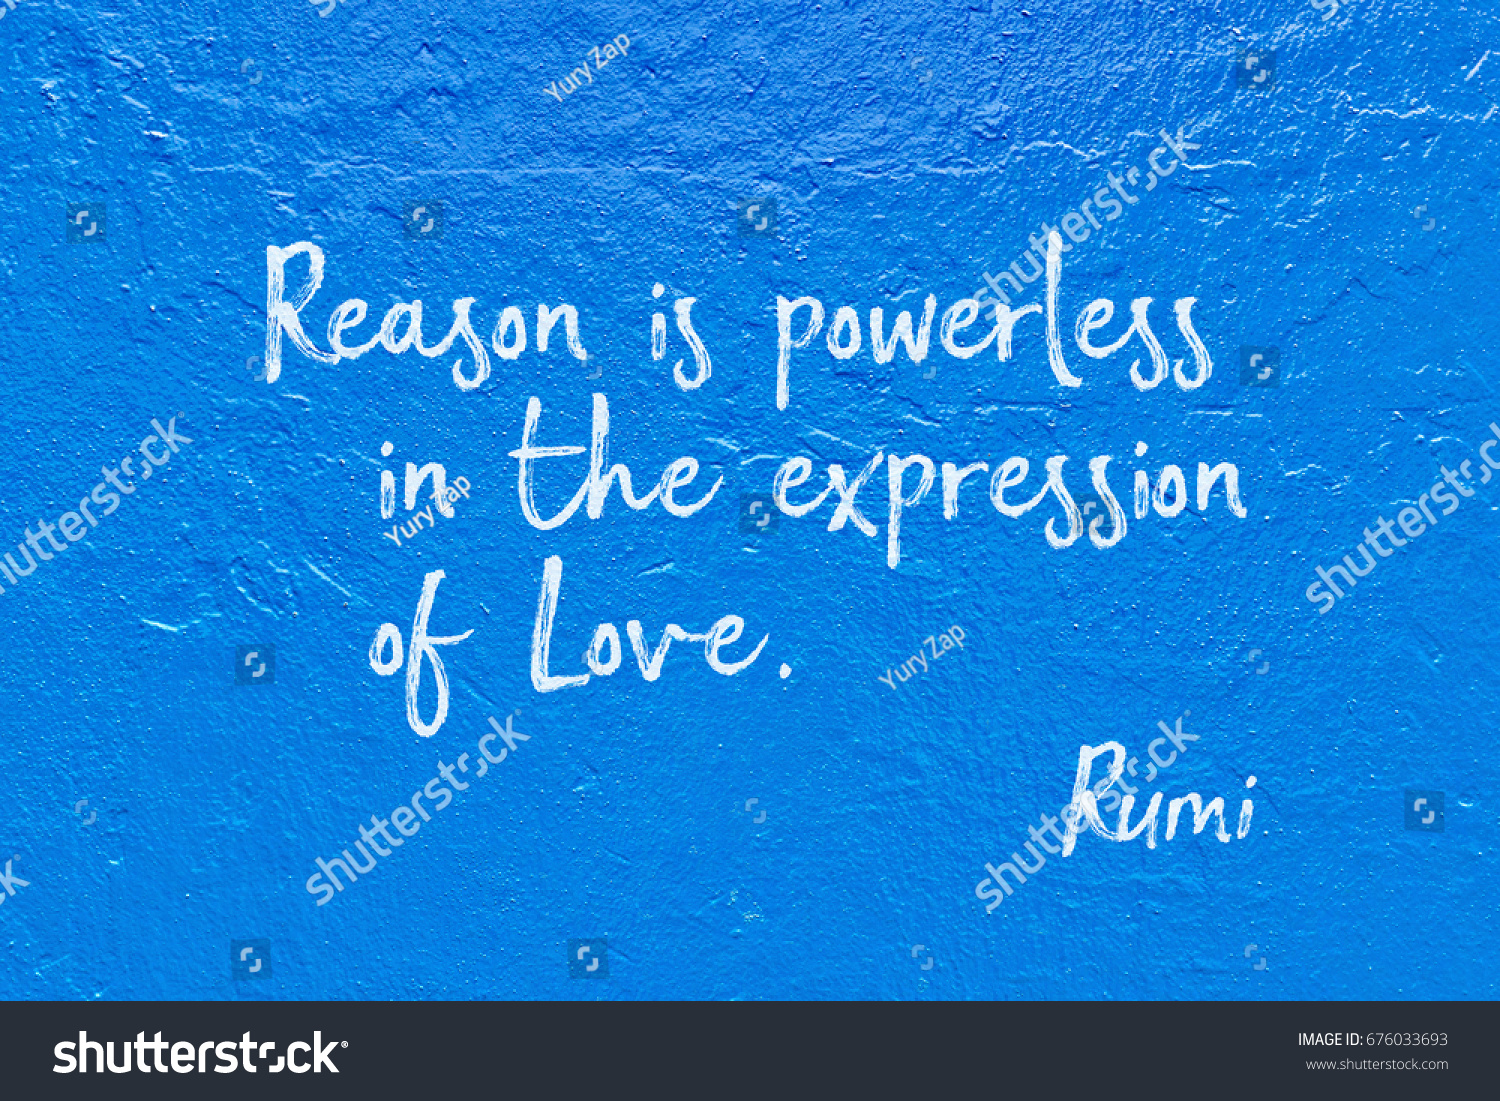 Reason is powerless in the expression of Love ancient Persian poet and philosopher Rumi quote